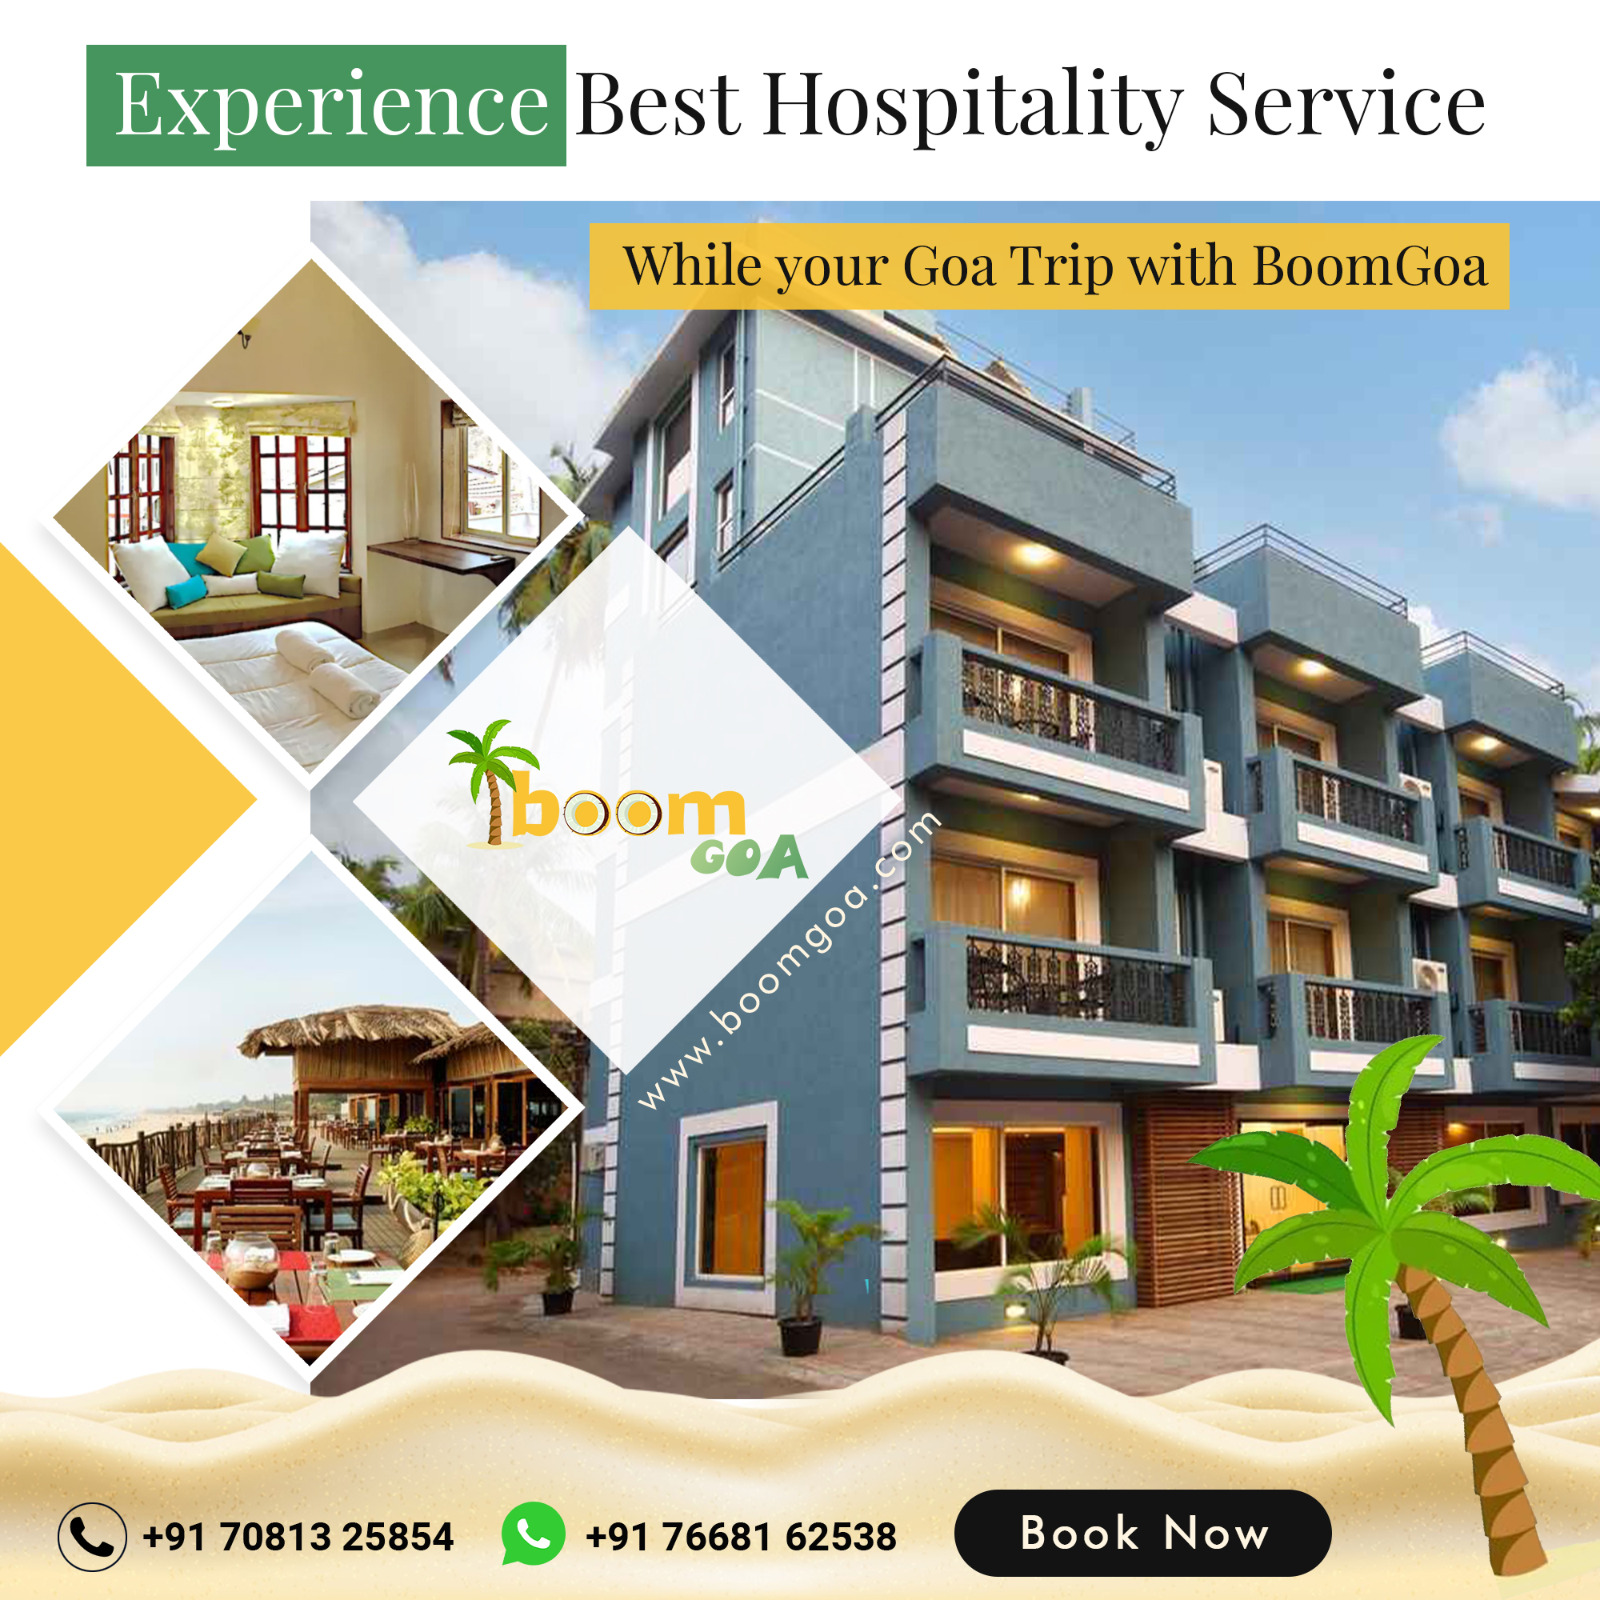 Experience [il Hospitality Service

While your Goa Trip with BoomGoa

 

Book Now

(0) +917081325854 (1) +9176681 62538